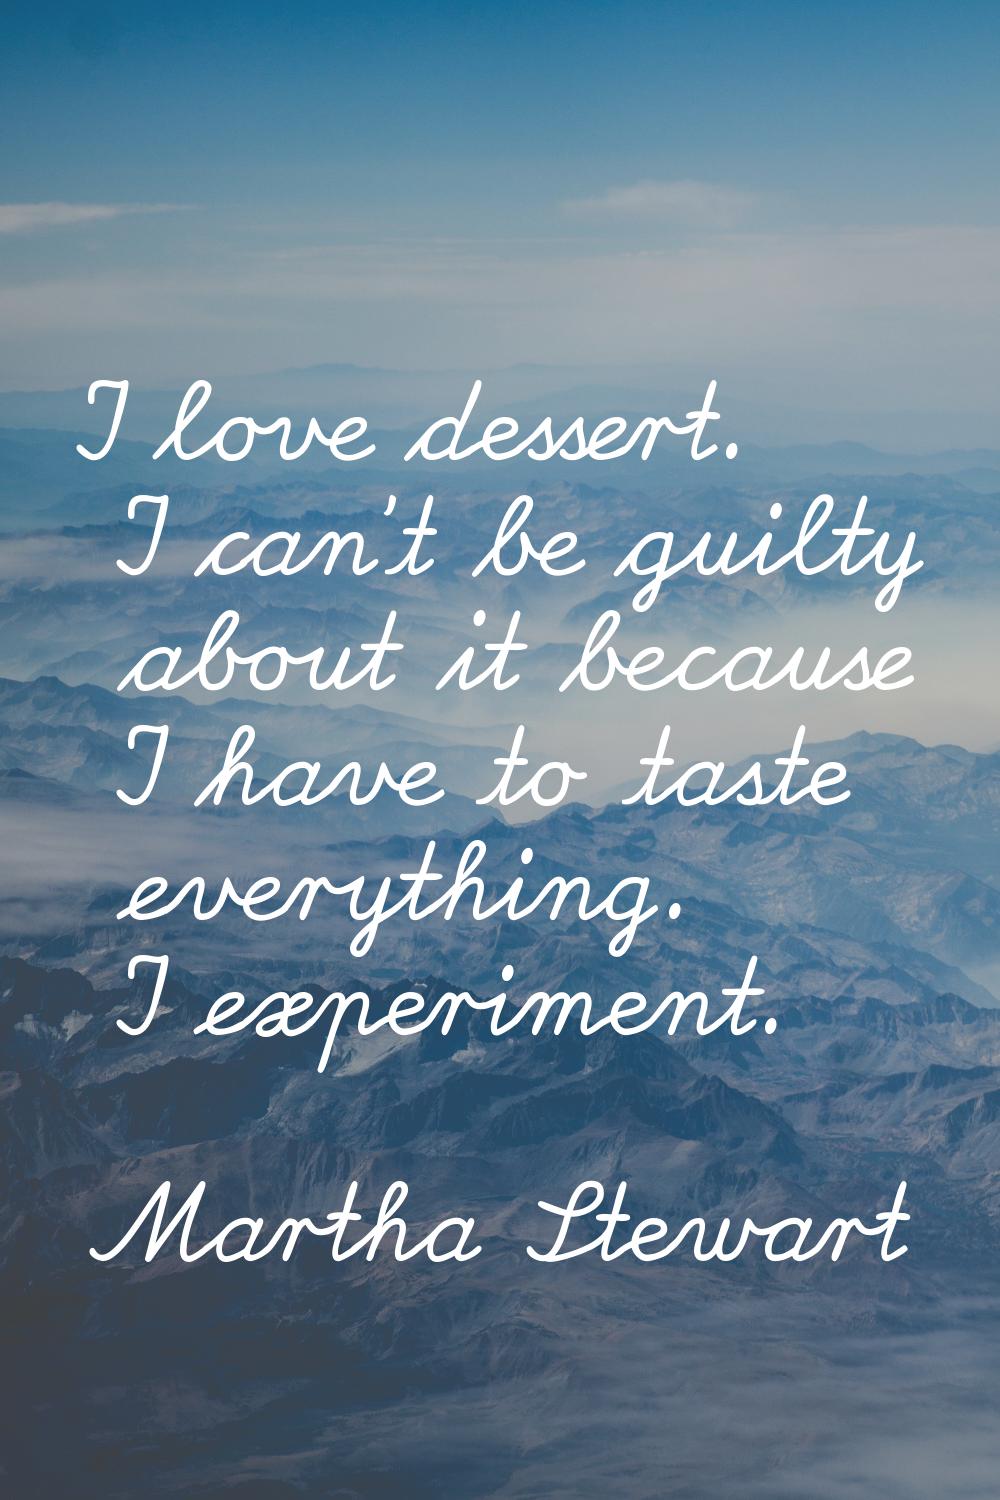 I love dessert. I can't be guilty about it because I have to taste everything. I experiment.